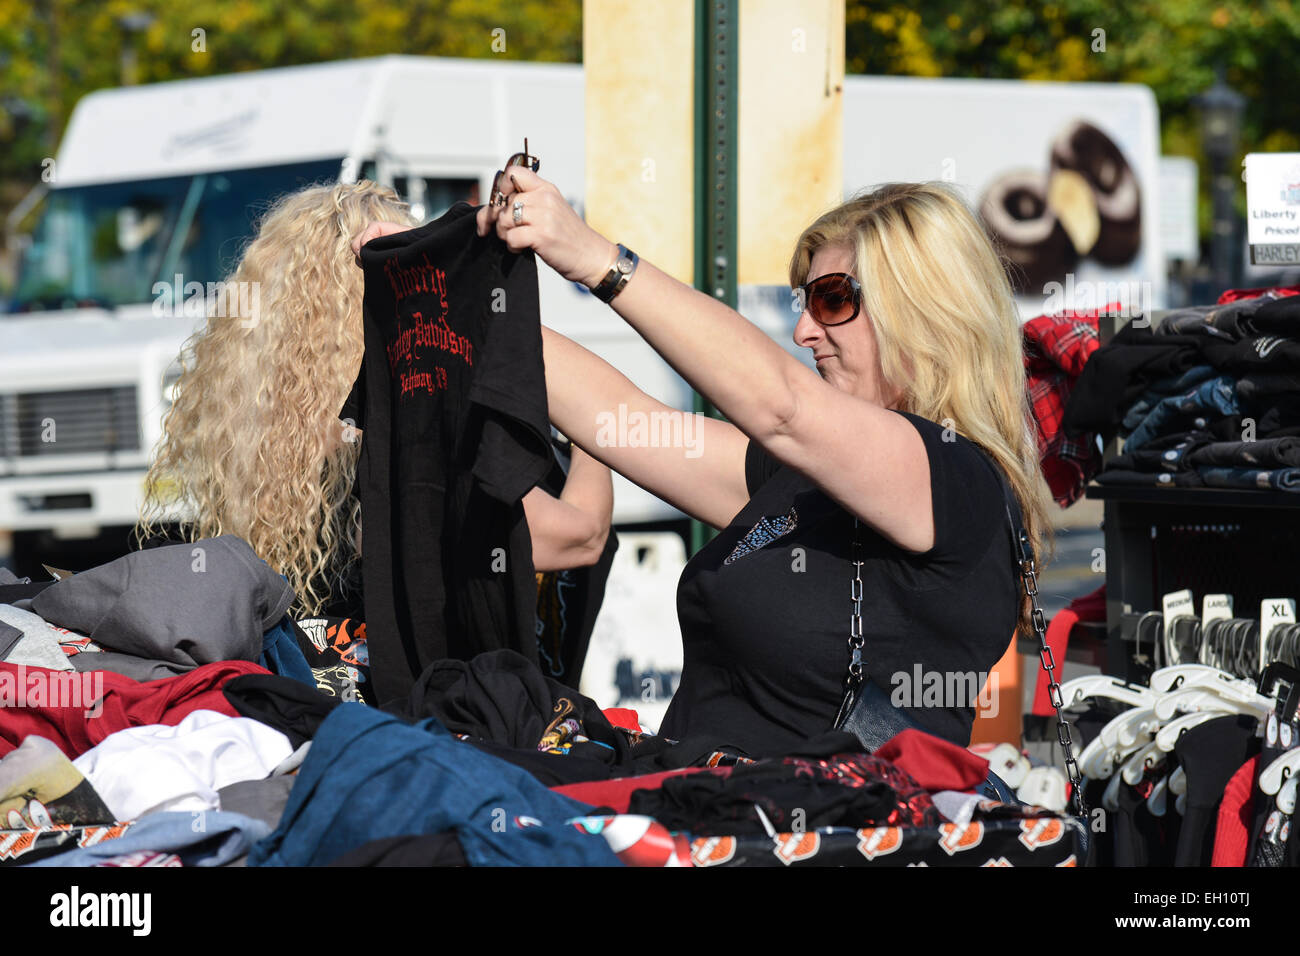 Woman checking a t-shirt out during the Liberty Harley Davidson anniversary party in Rahway, New Jersey. USA. Stock Photo